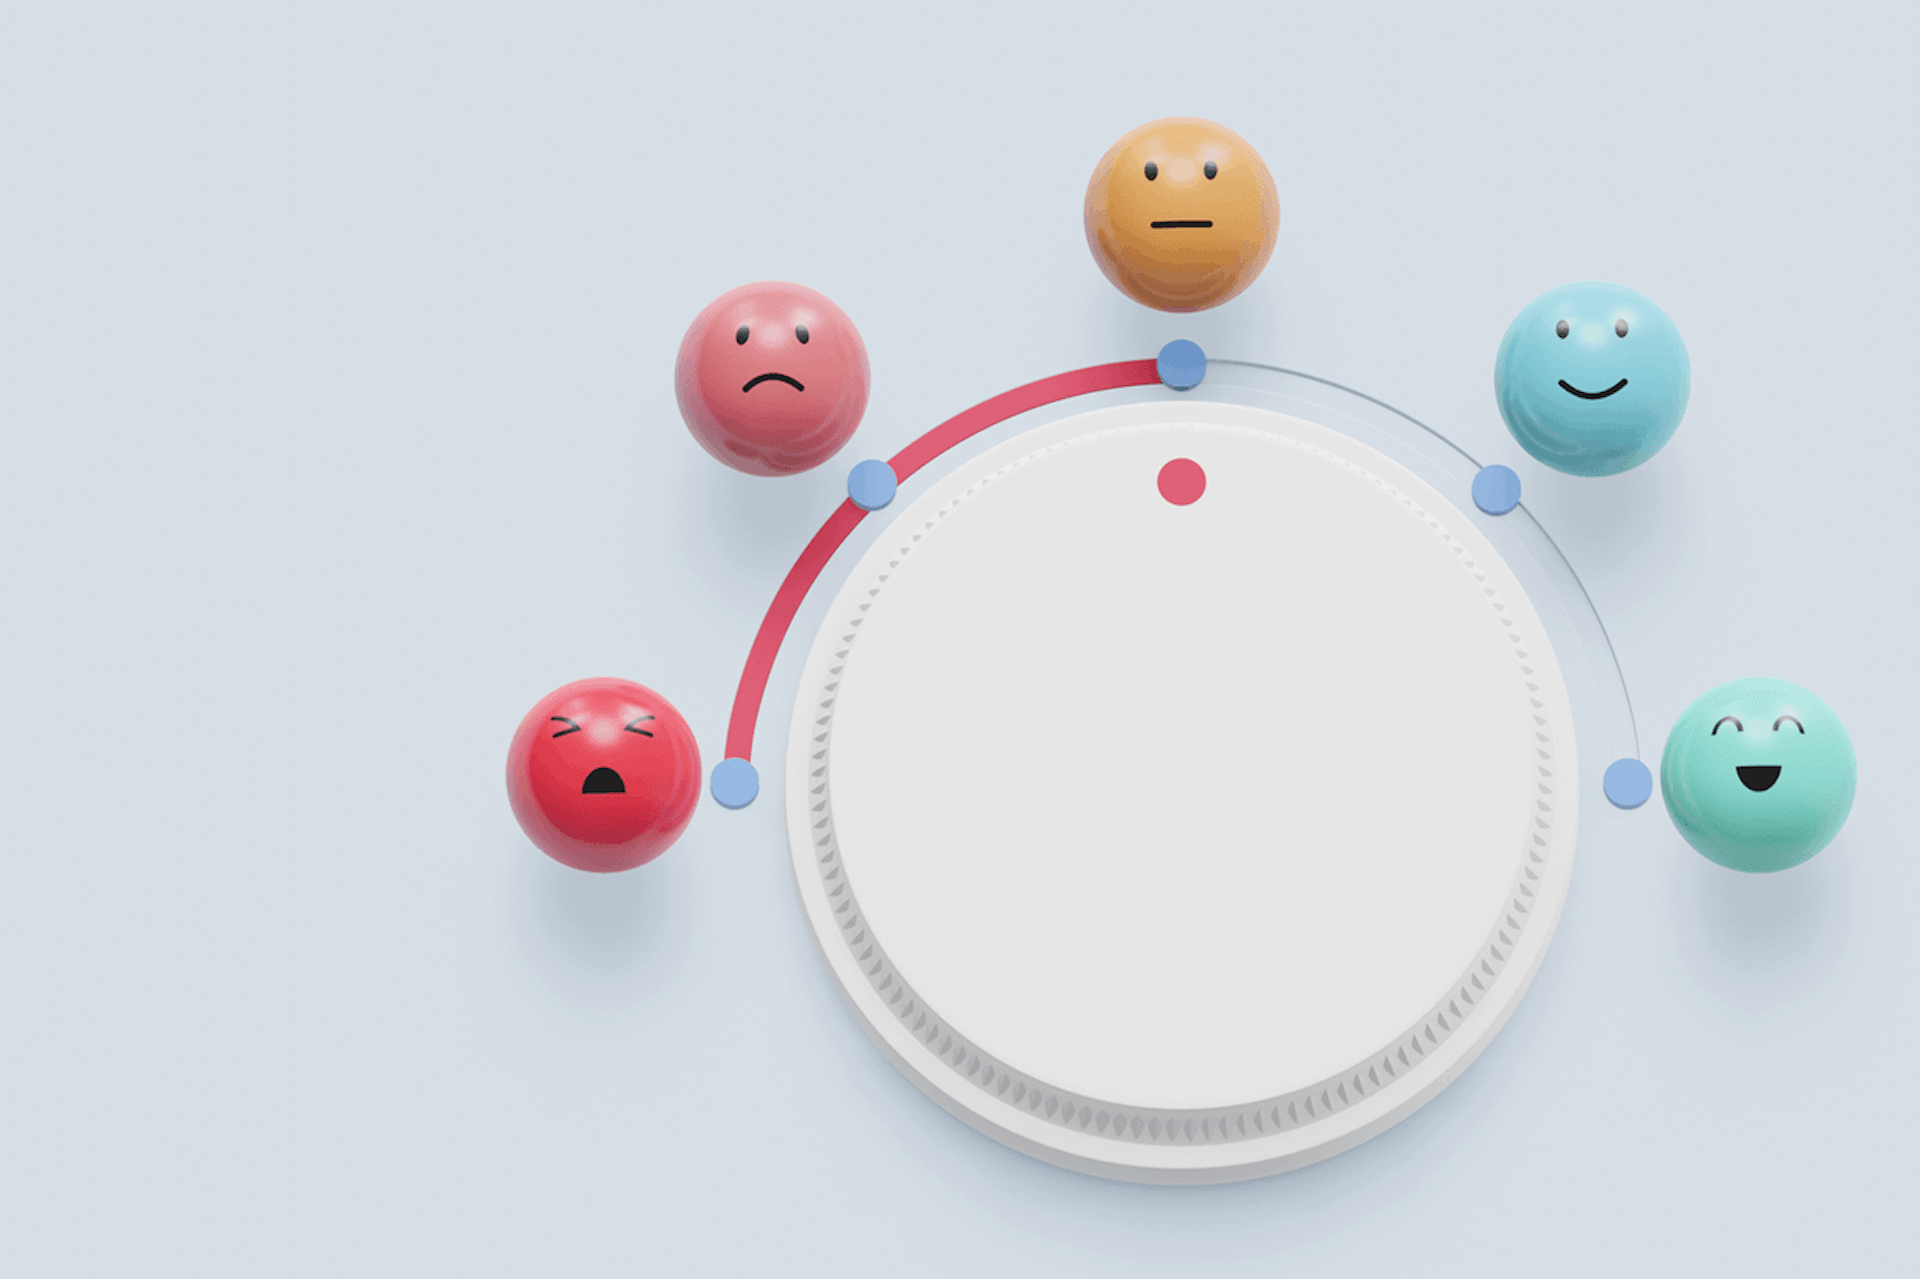 Image showing a scale of emotions from angry to happy. Top consumer insights companies blog post.